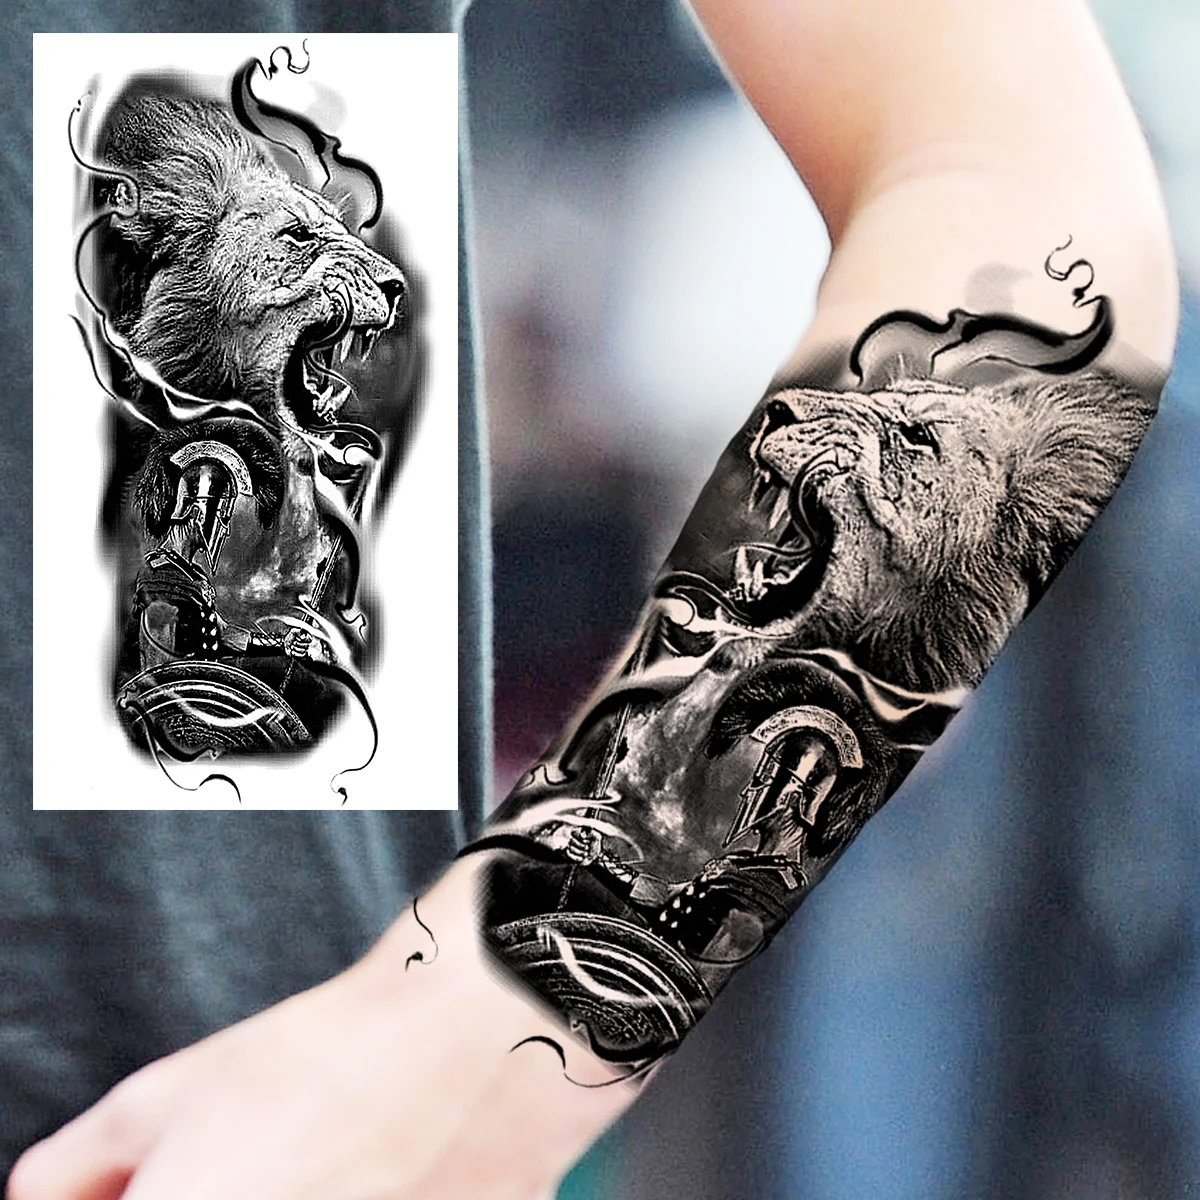 Black Skull Temporary Tattoos For Women Men Realistic Forest Lion Compass Tiger Fake Tattoo Sticker Forearm Waterproof Tatoos